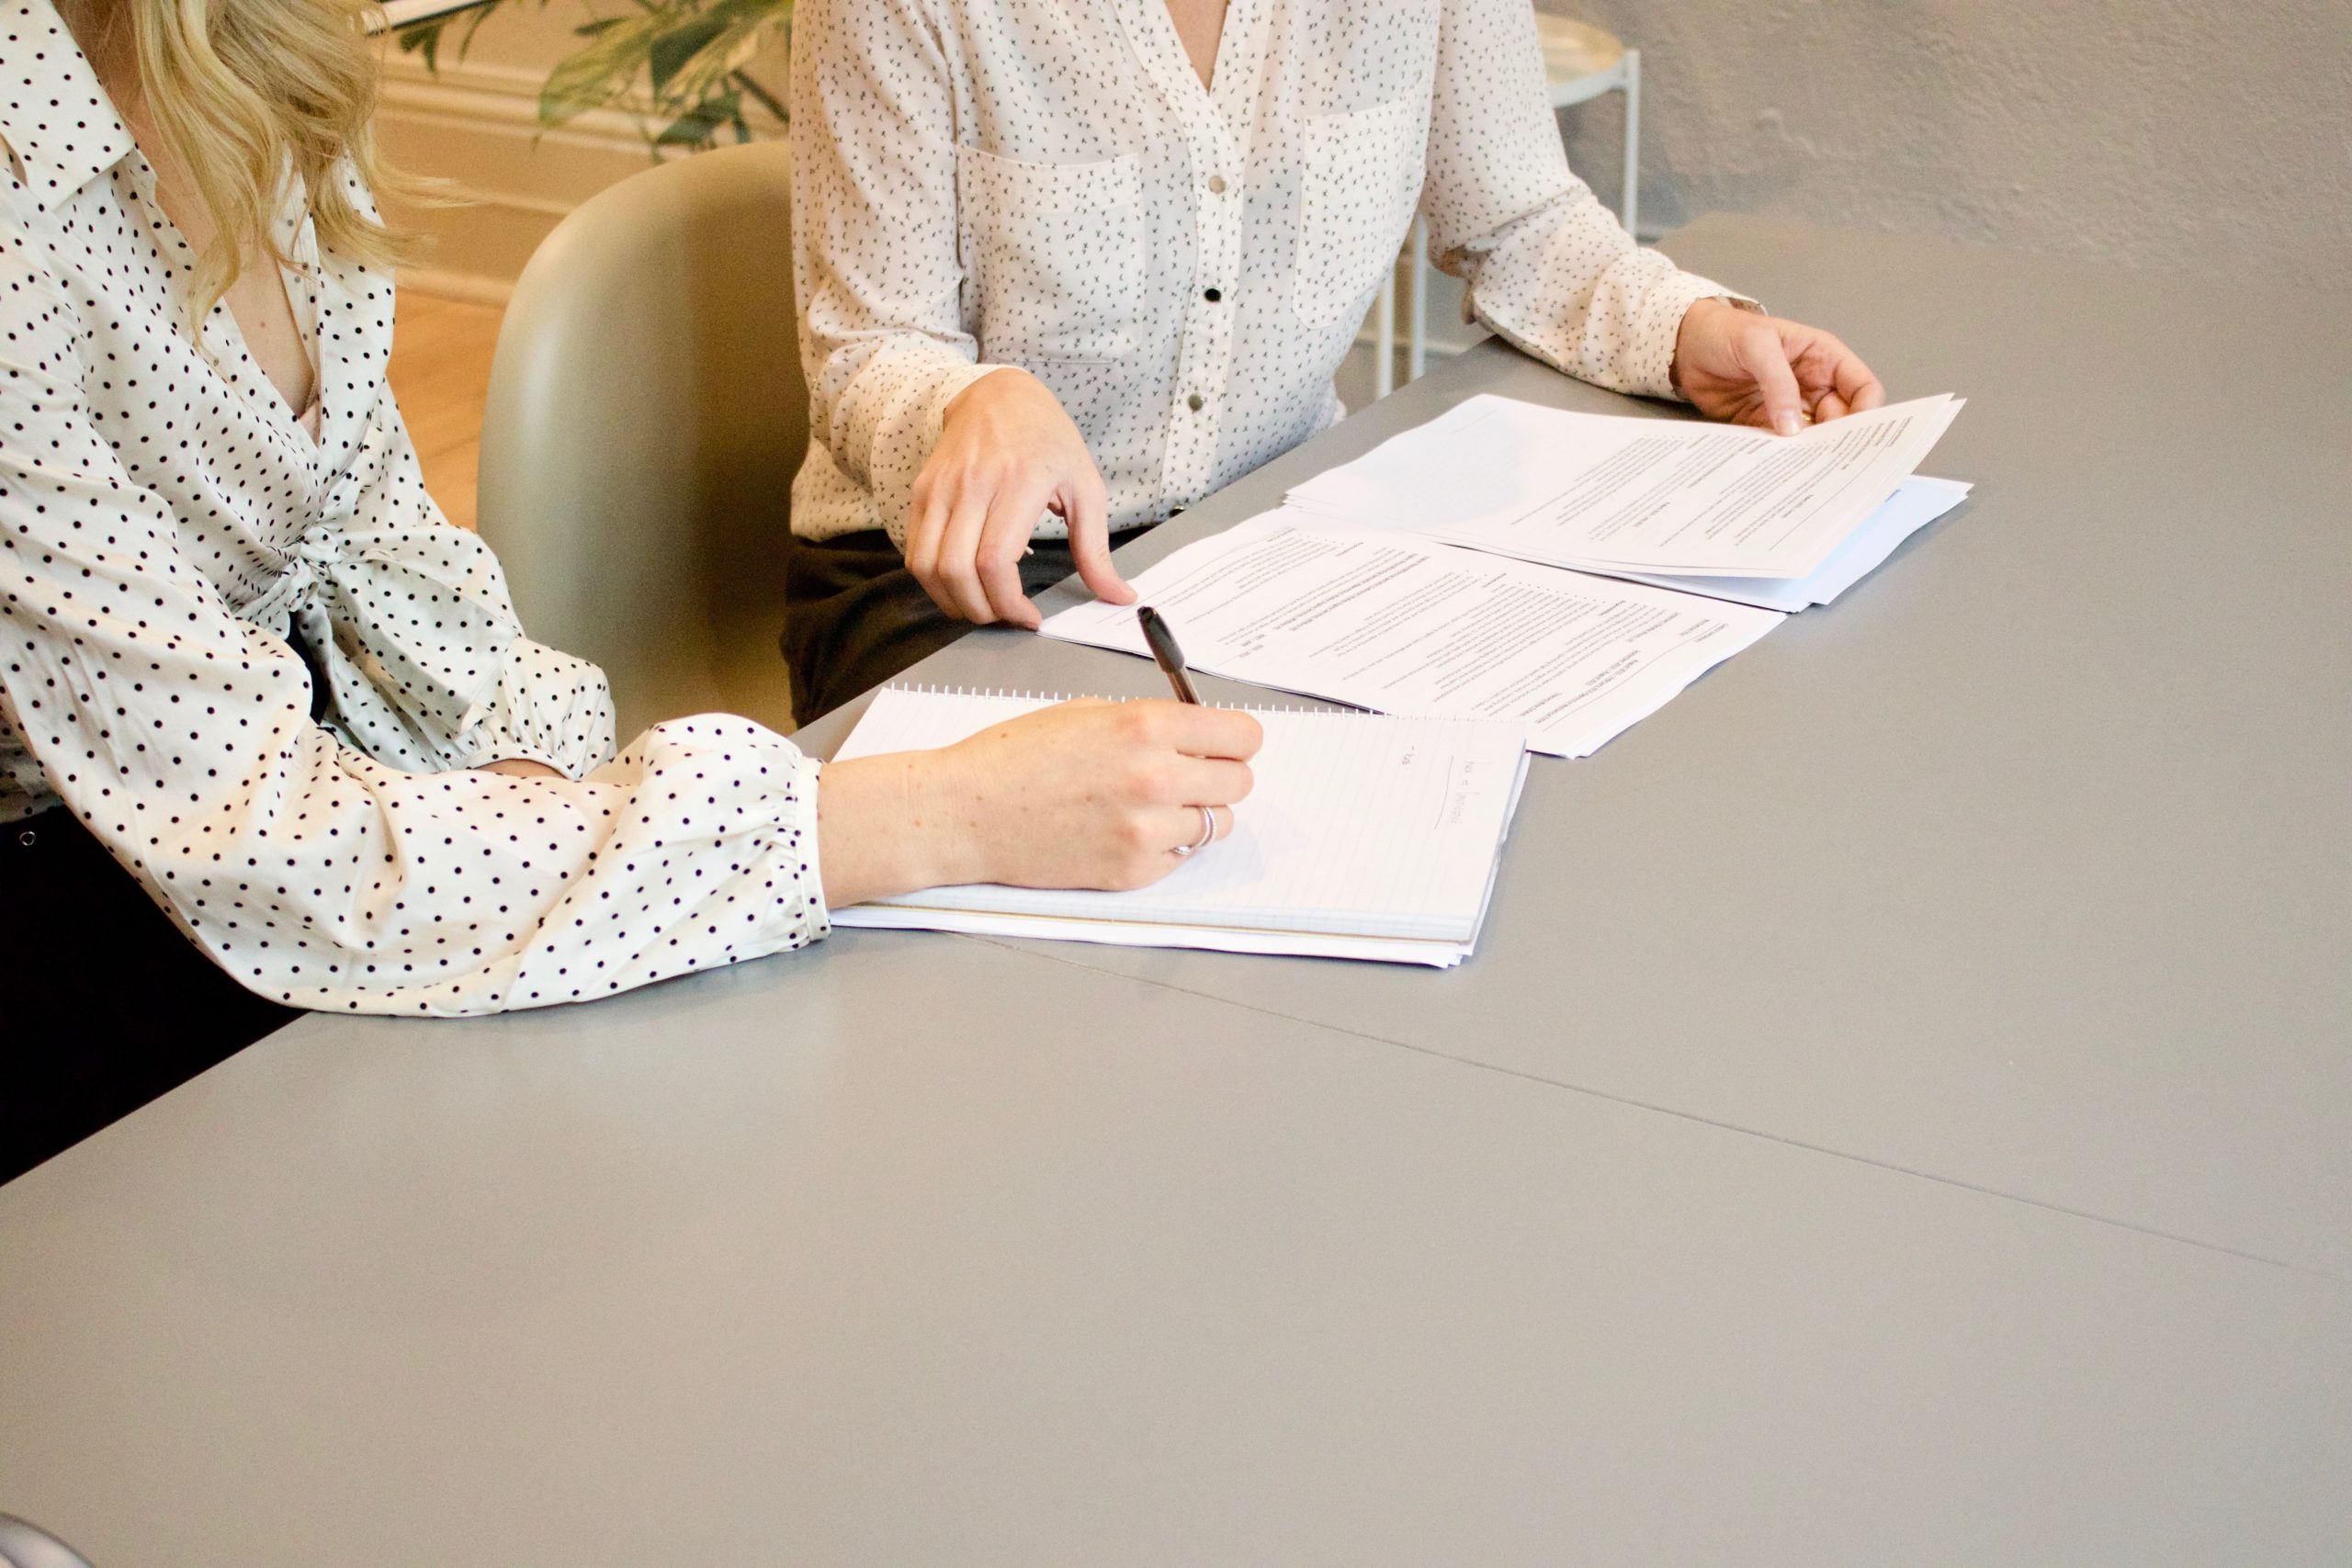 Two women in business attire sit at a table reviewing and signing documents.